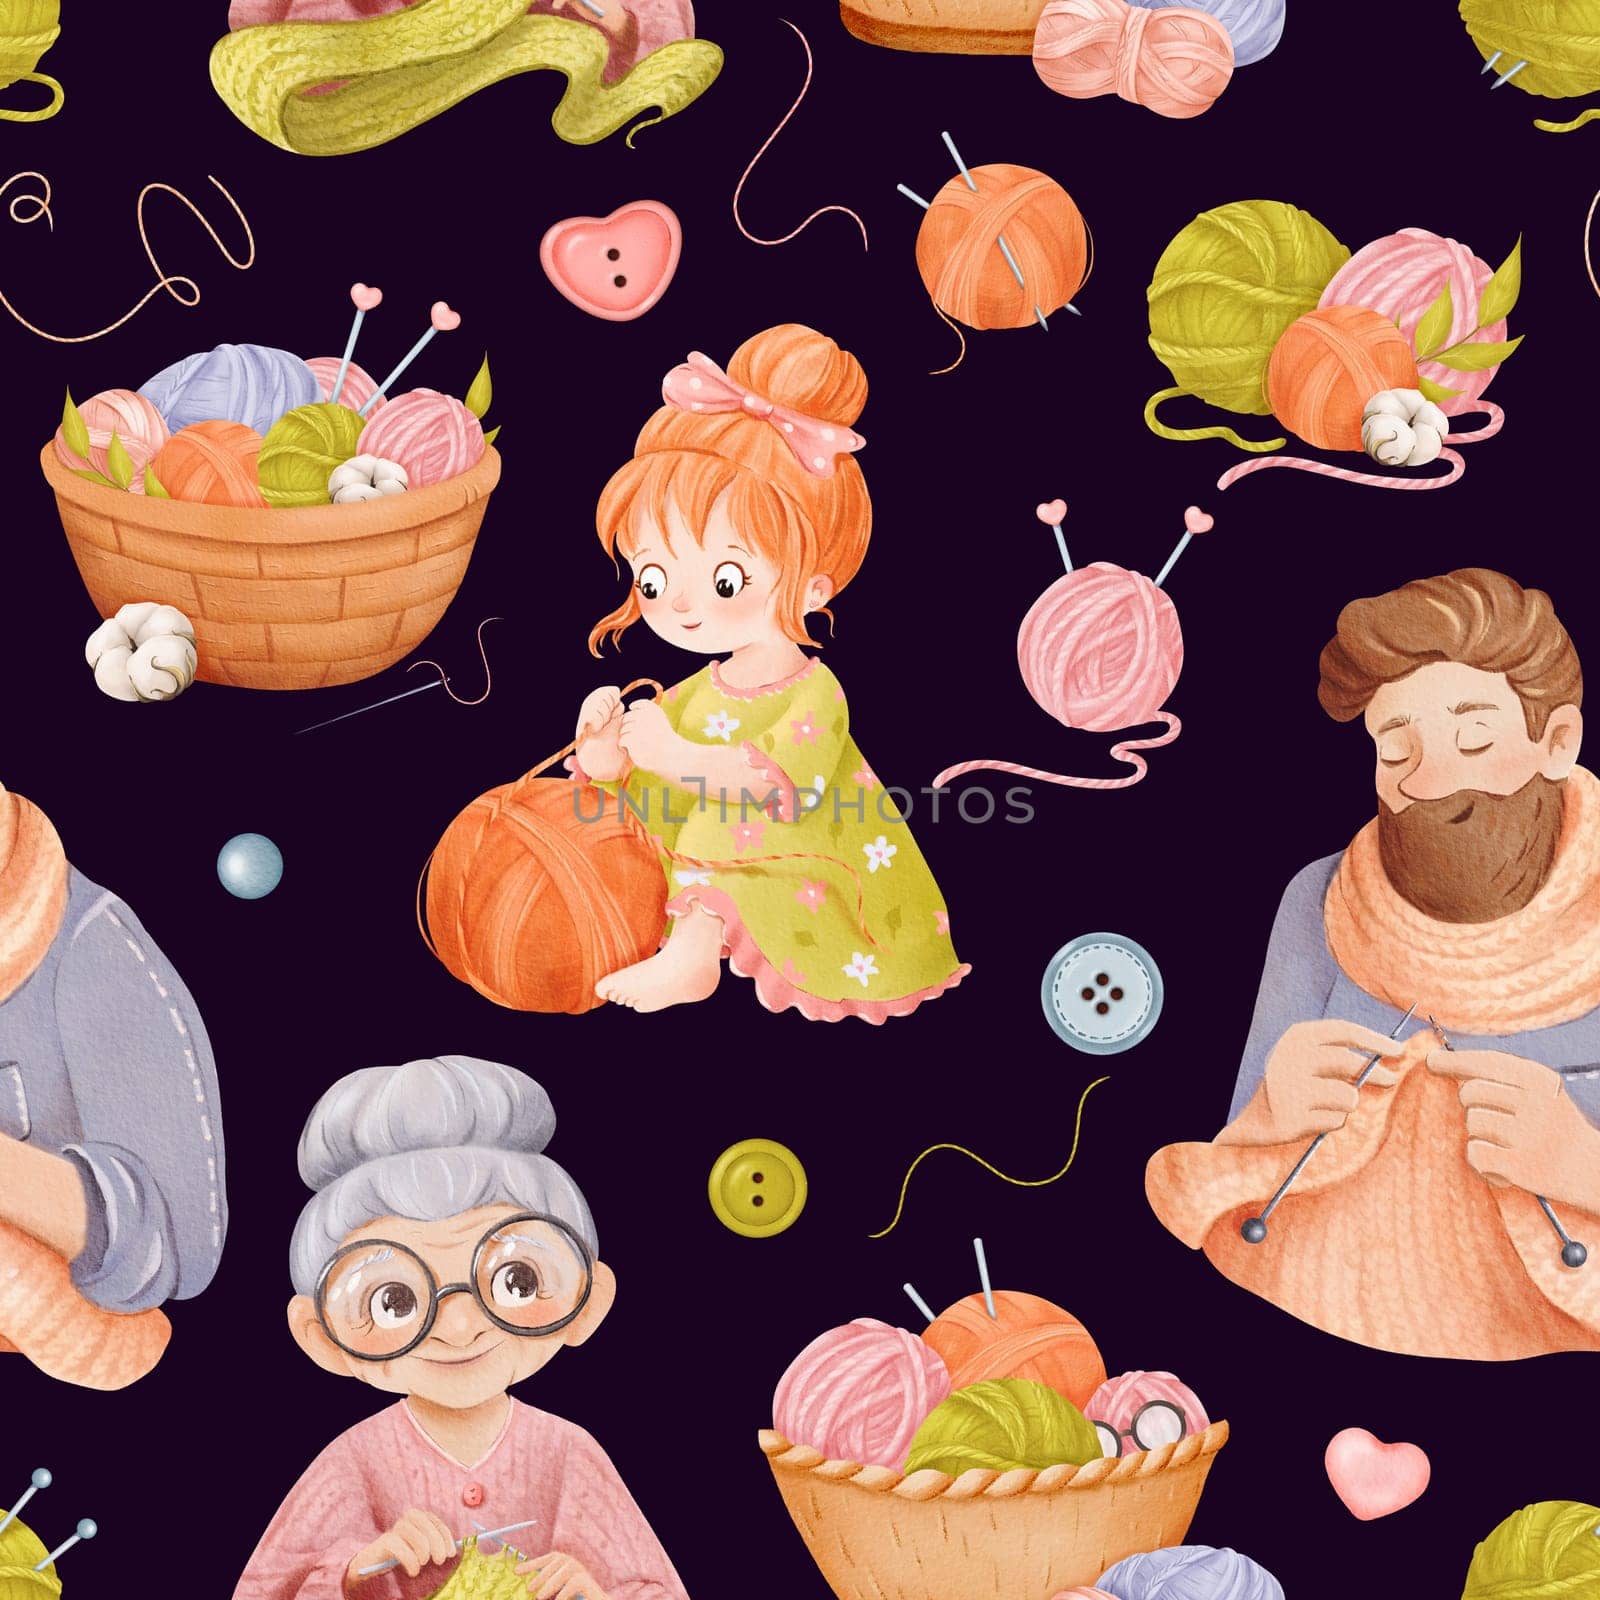 A seamless knitting-themed pattern featuring characters engaged in needlework. A grandmother in glasses and a hipster man are knitting scarves, while a girl plays with a ball of yarn. watercolor by Art_Mari_Ka